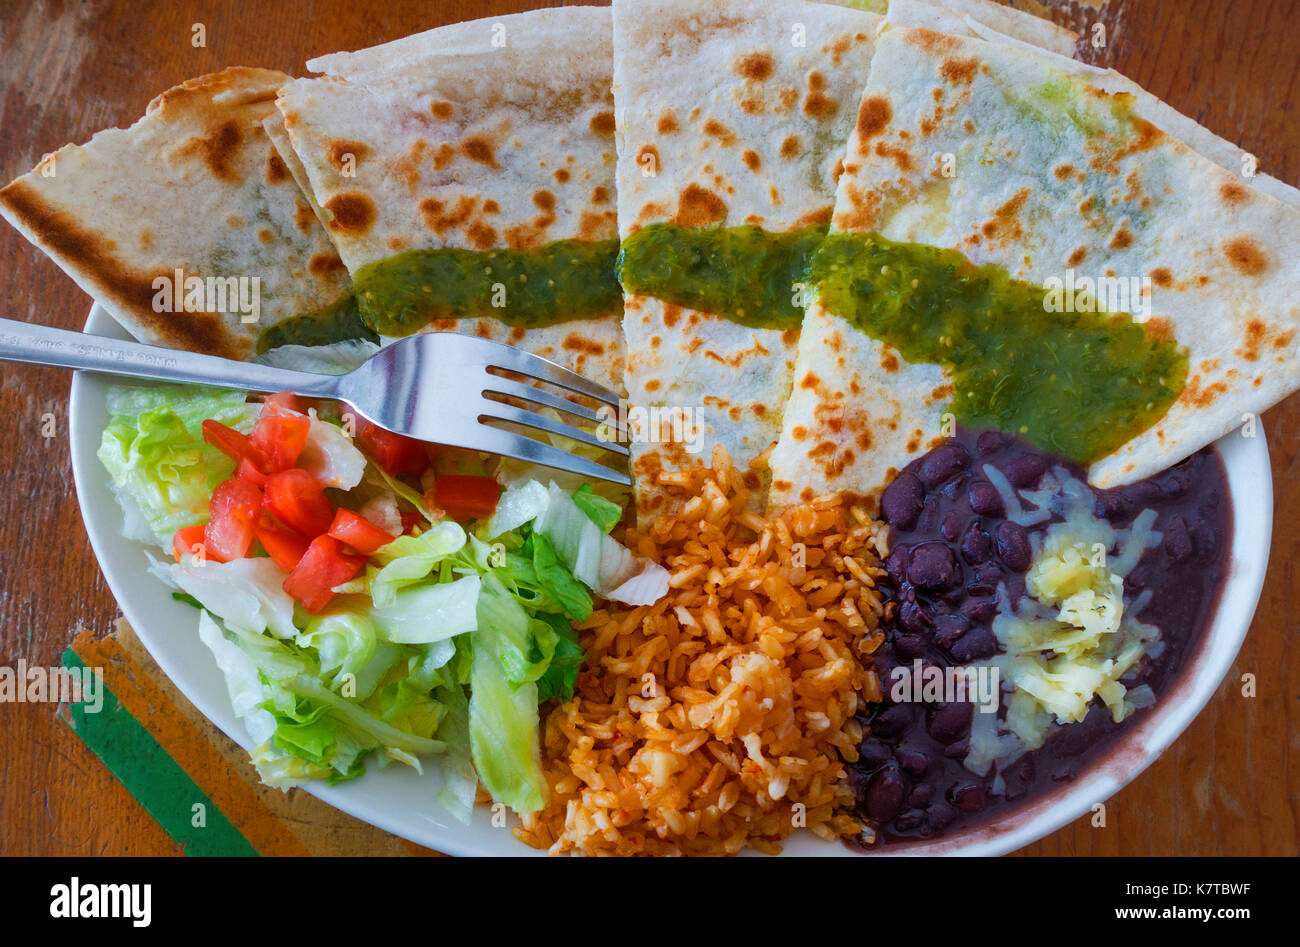 Quesadillas, with salsa verde, black beans, brown rice, cheese and salad Stock Photo